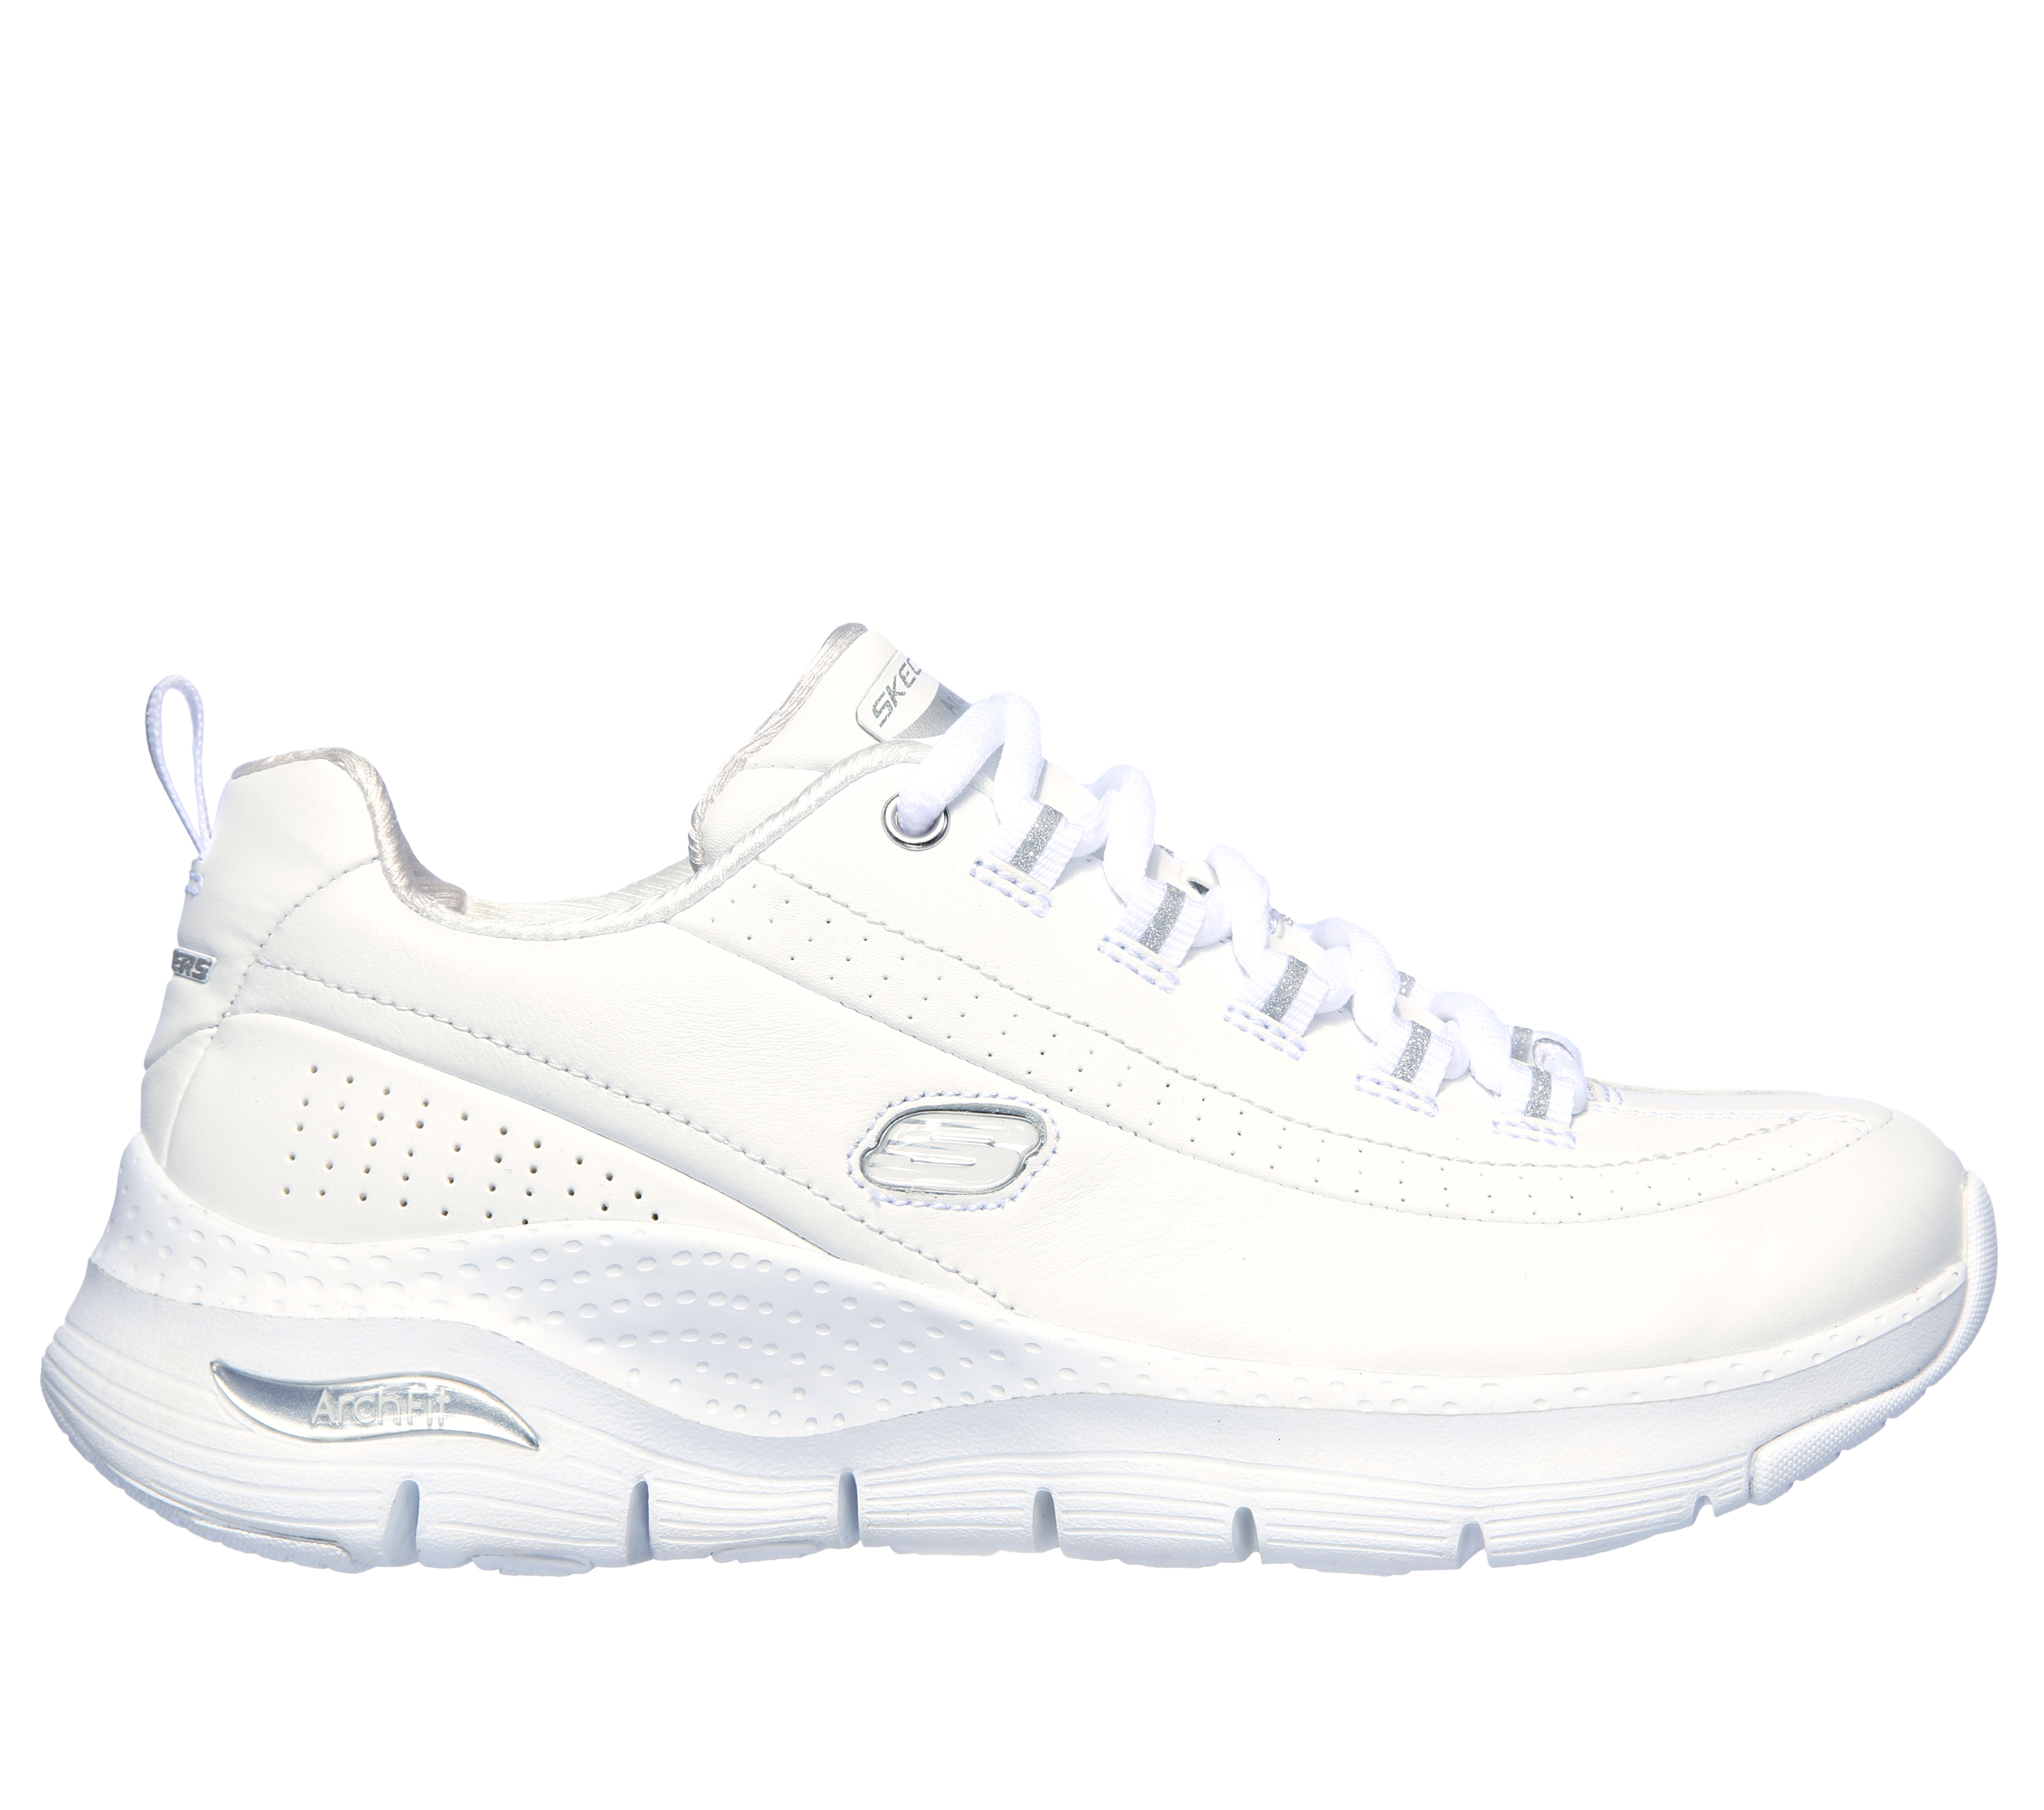 skechers agility perfect fit